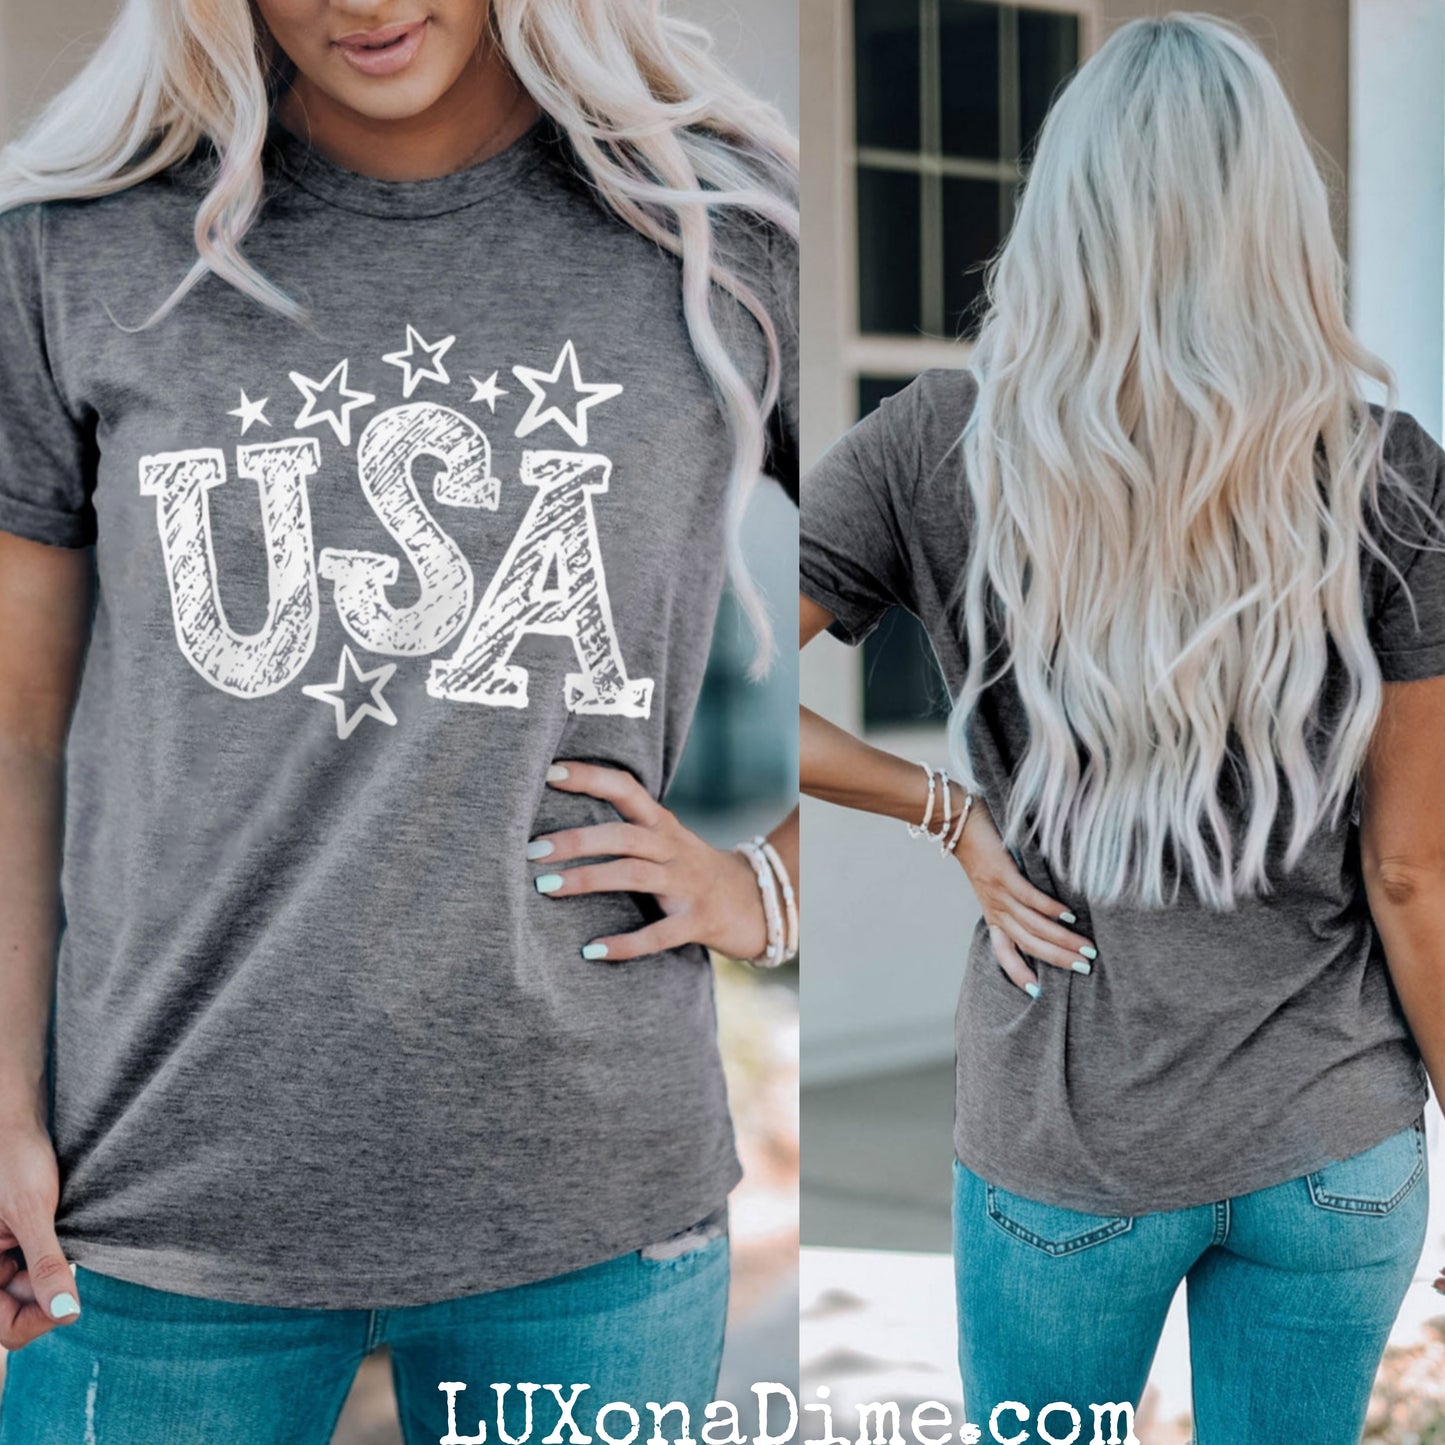 Chalkboard USA Drawn Star Graphic Top Cuffed Short Sleeve Tee Shirt (Plus Size Available)